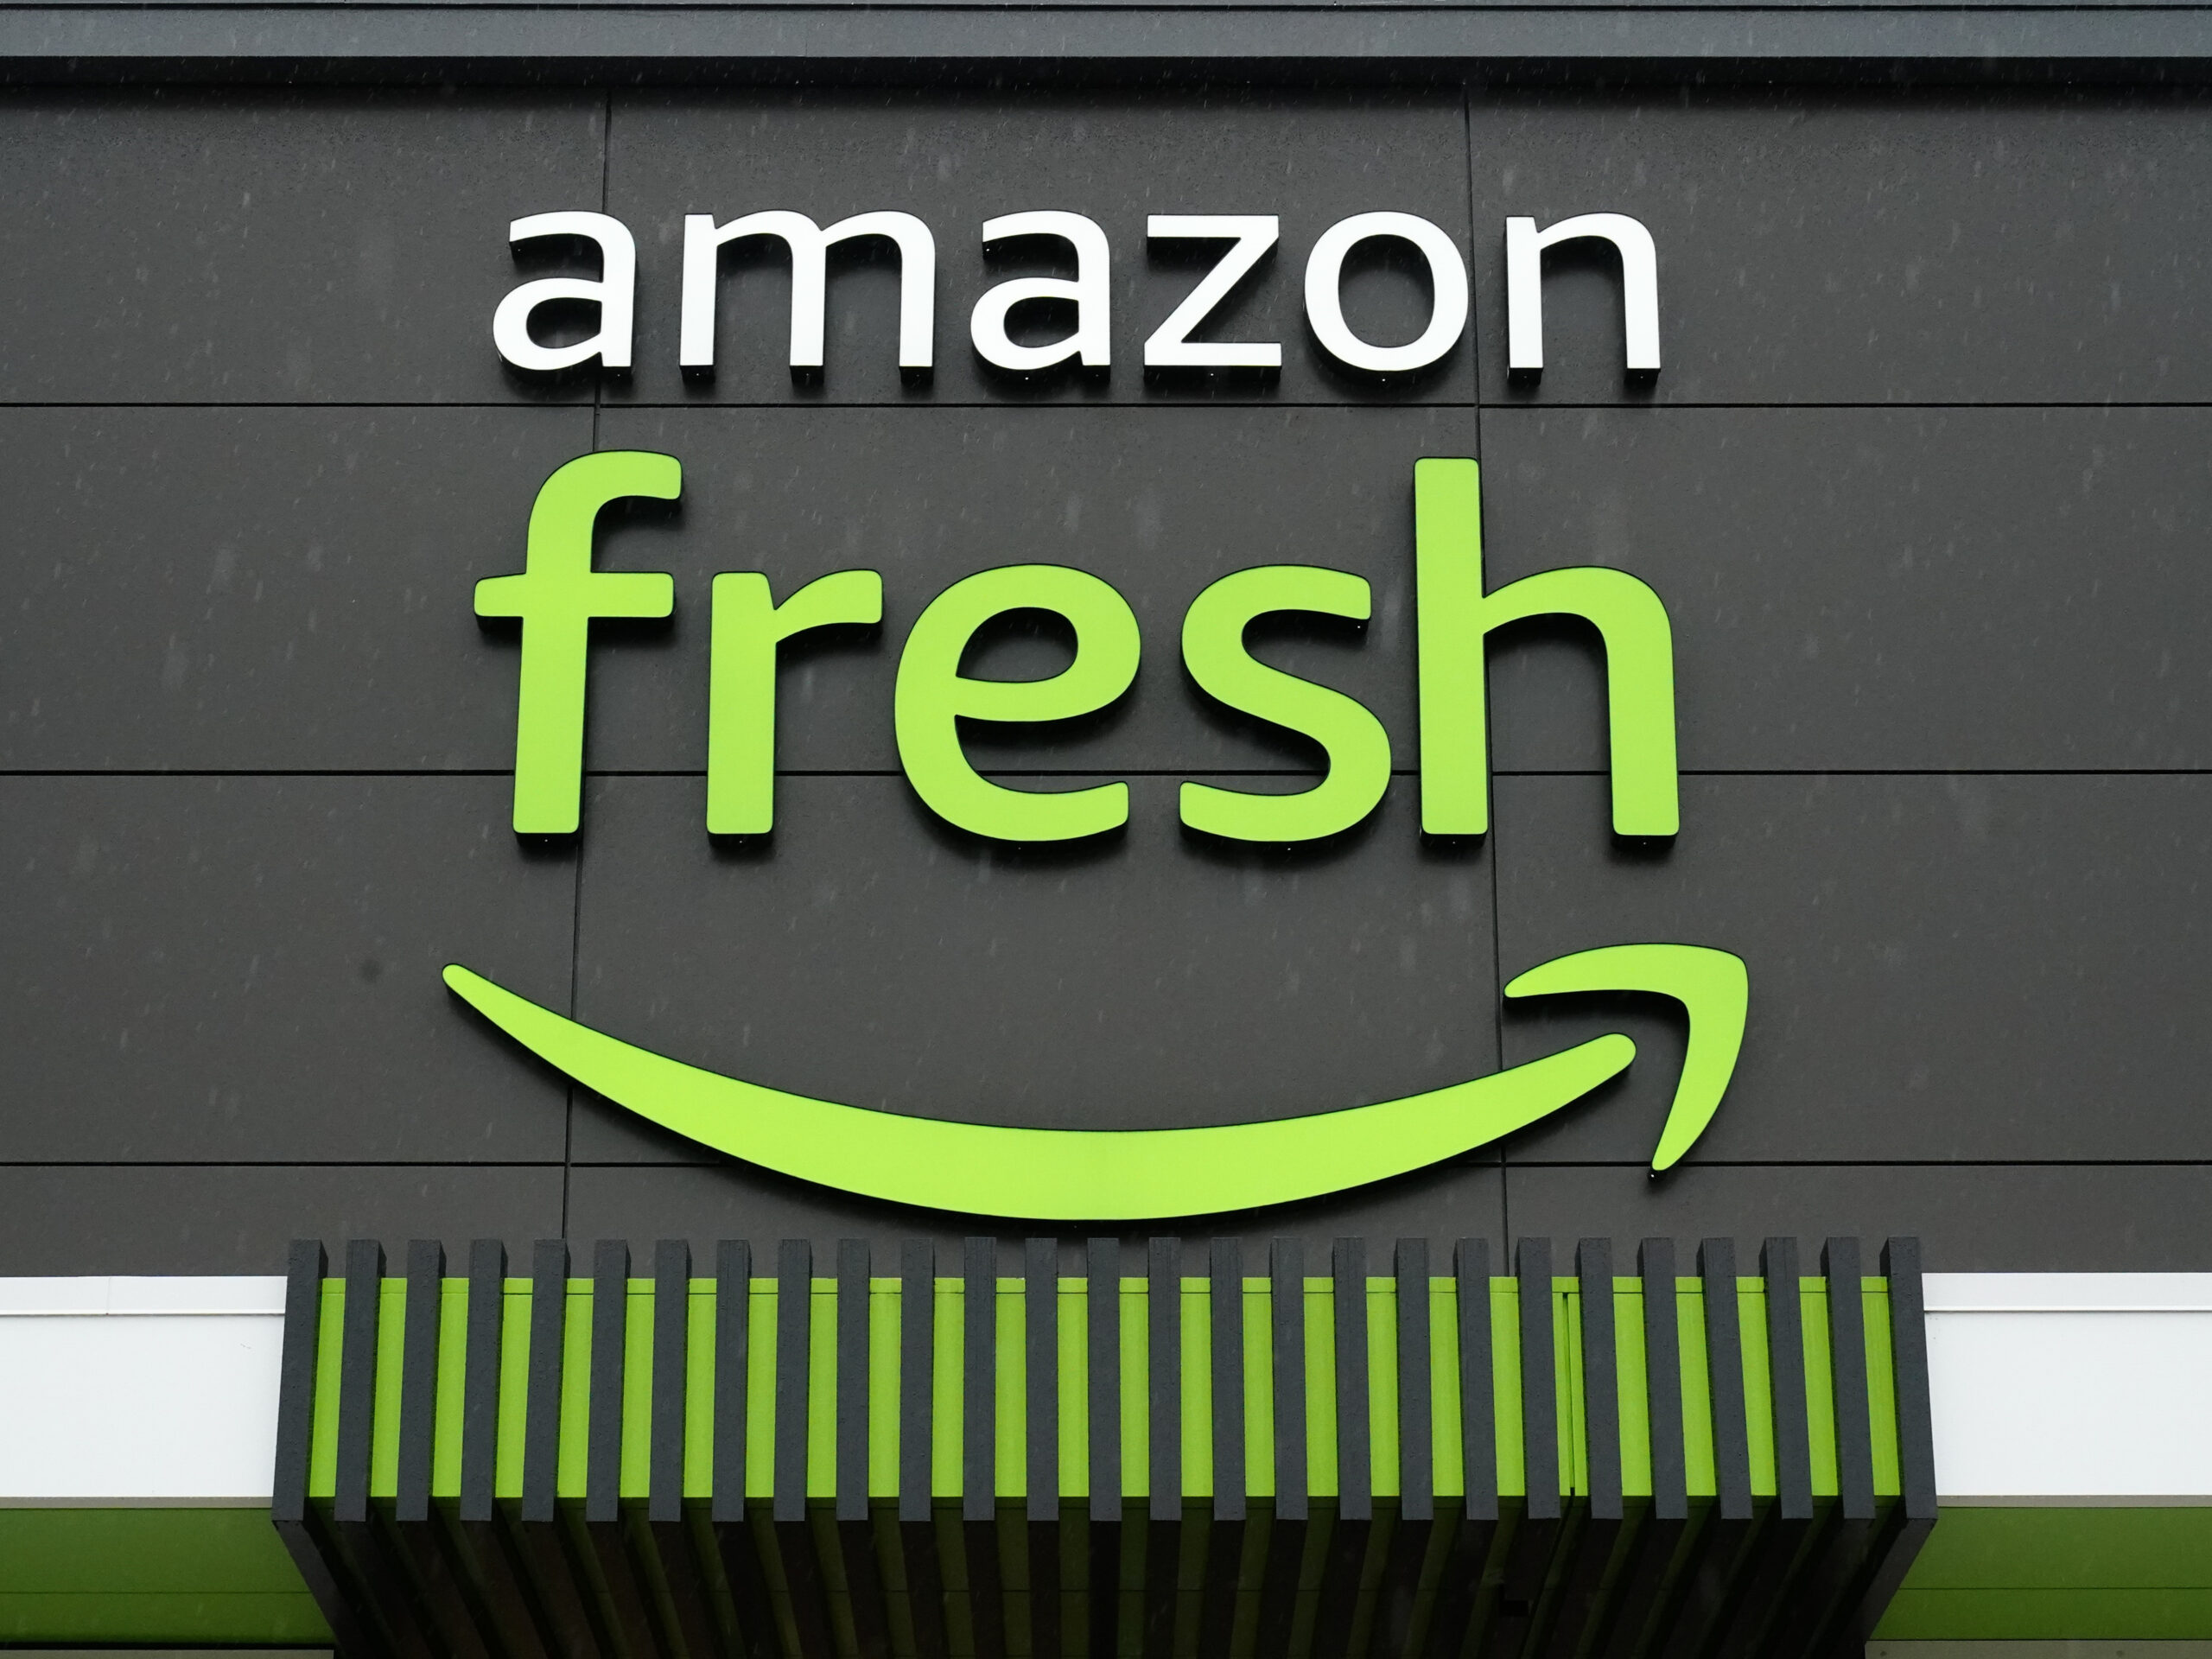 Amazon says it is removing Just Walk Out technology from its Fresh grocery stores